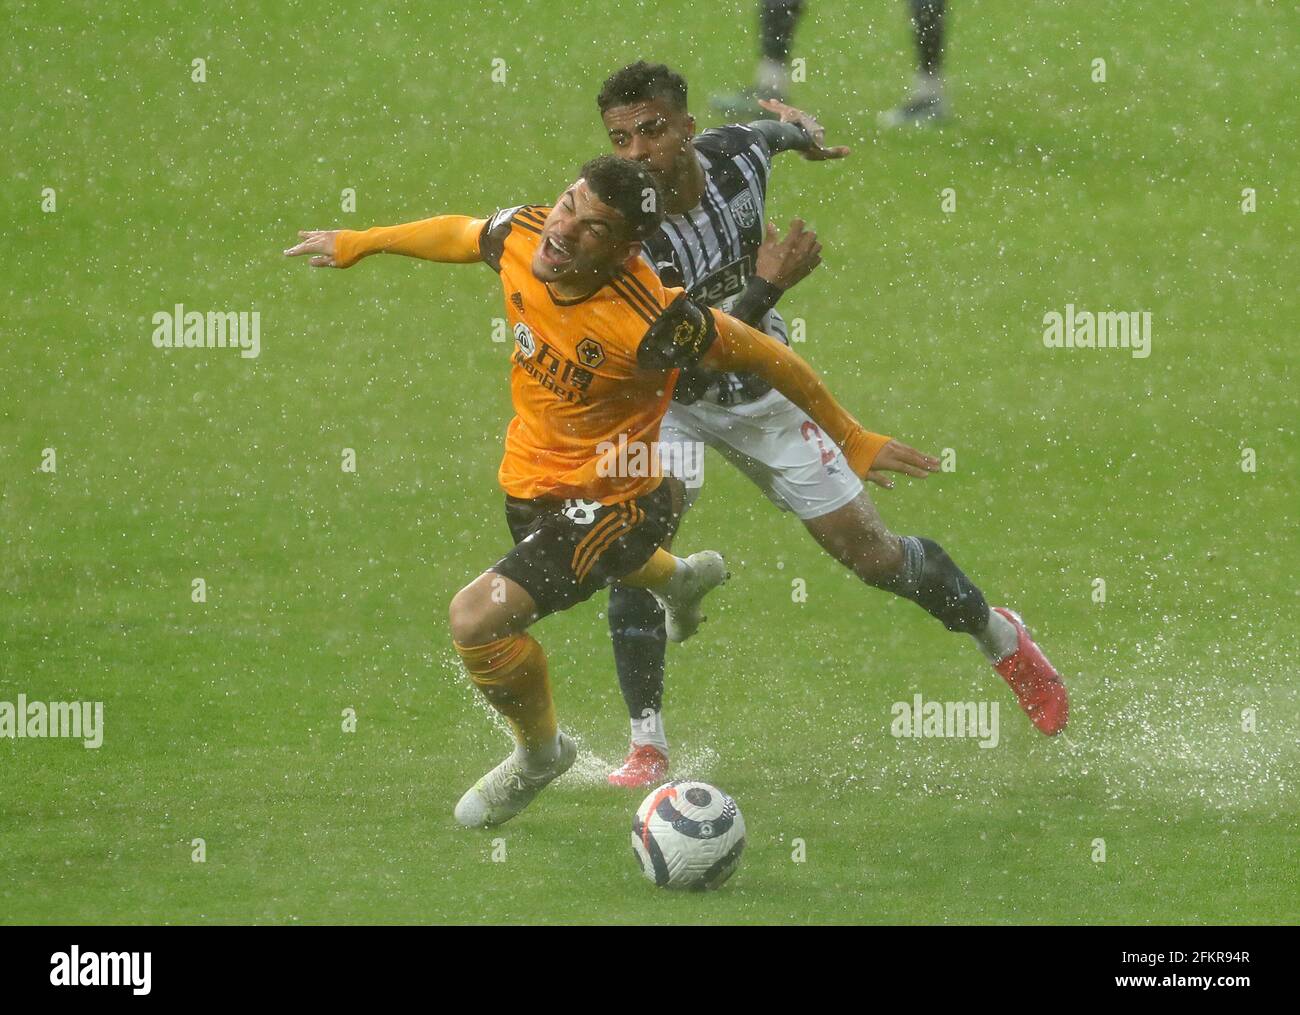 Wolverhampton Wanderers' Morgan Gibbs-White (left) and West Bromwich Albion's Darnell Furlong battle for the ball during the Premier League match at The Hawthorns, West Bromwich. Issue date: Monday May 3, 2021. Stock Photo